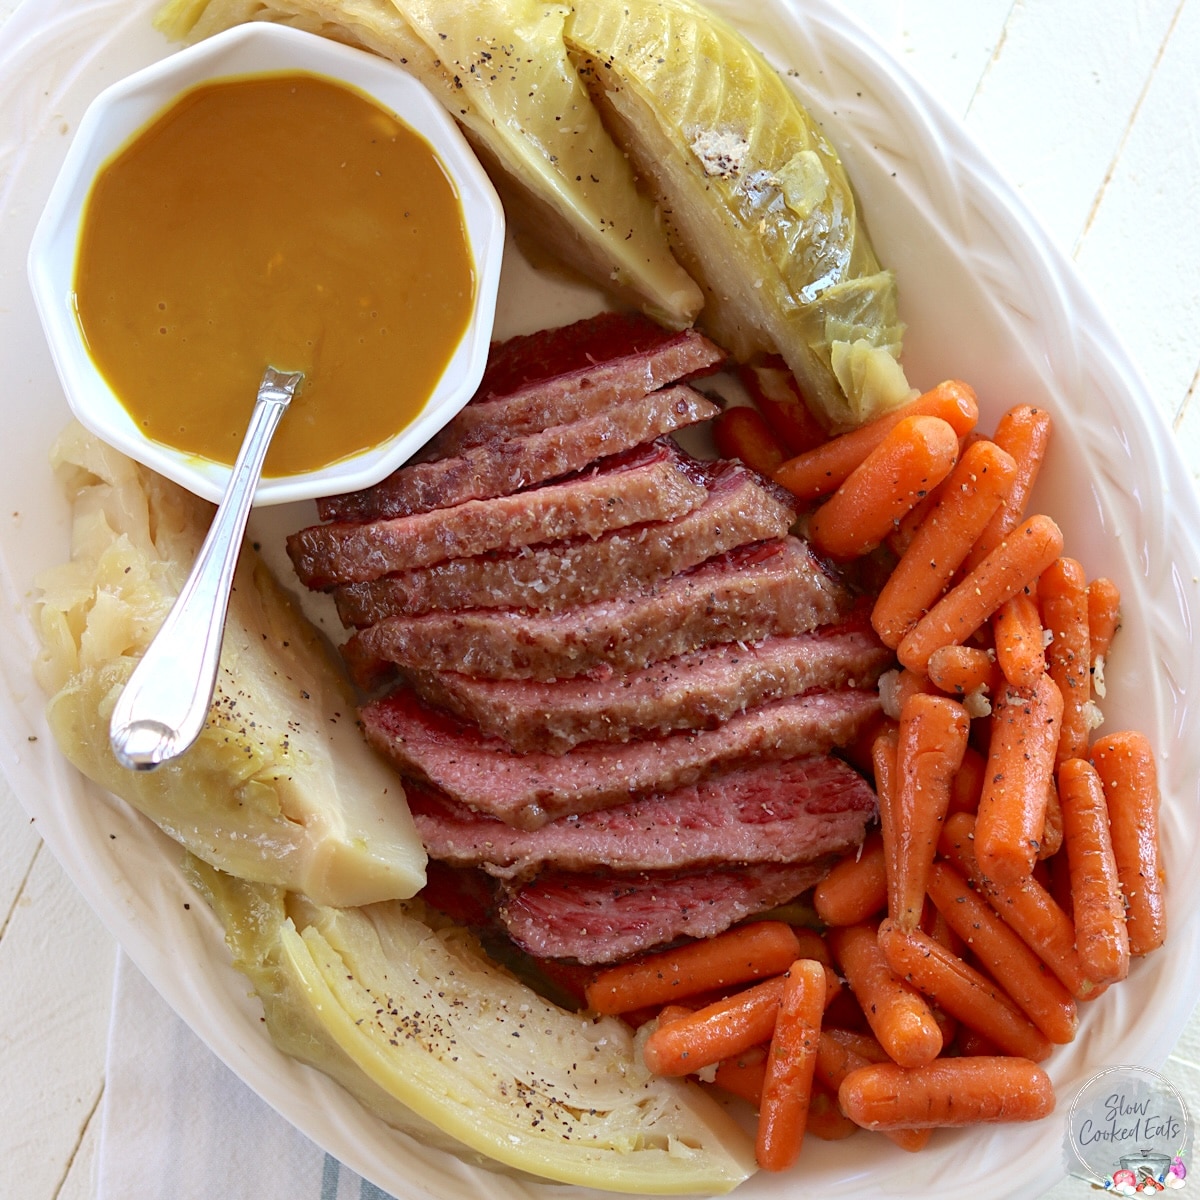 Carrots, cabbage, mustard sauce, and sliced slow cooker corned beef on a white platter.